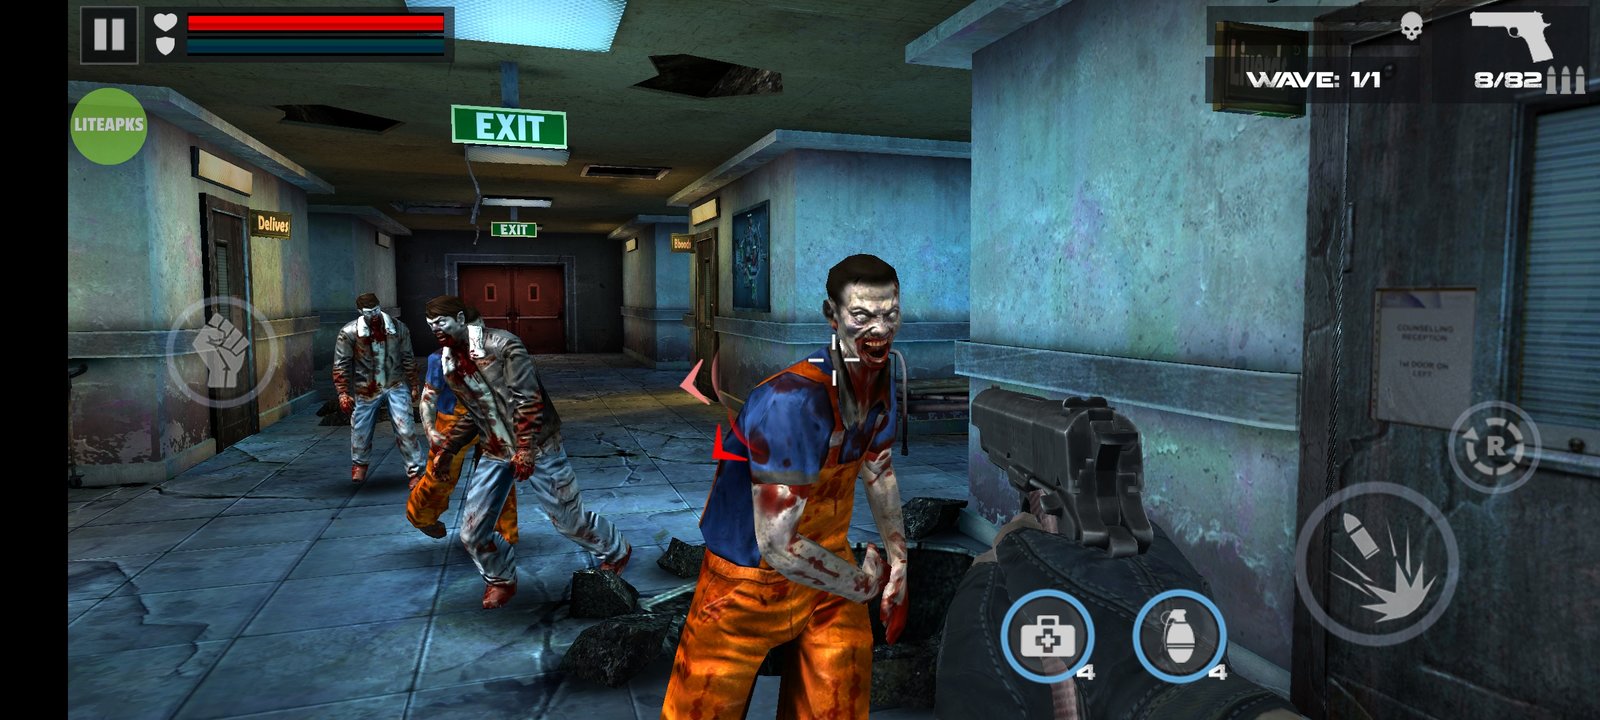 Dead Target: Zombie Games 3D - Apps on Google Play